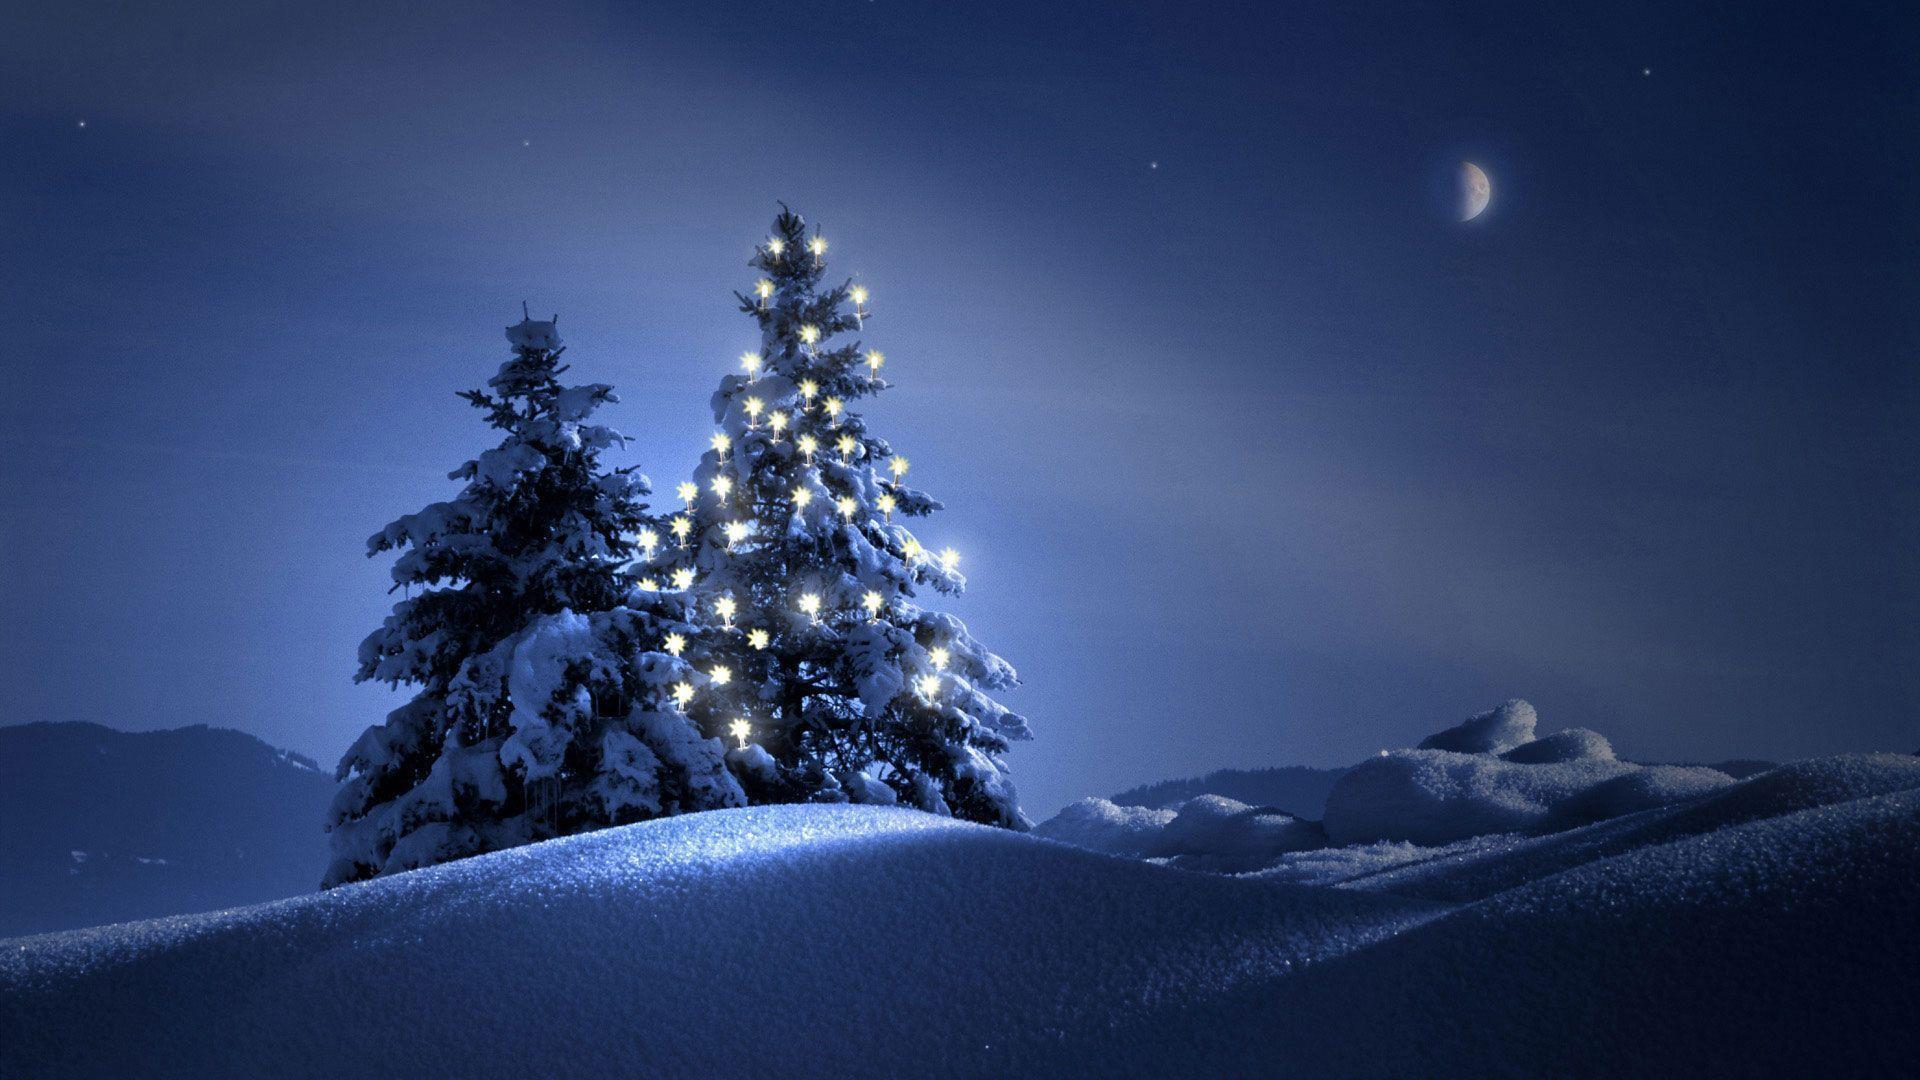 Snow Christmas Lights 31566 HD Wallpaper in Nature